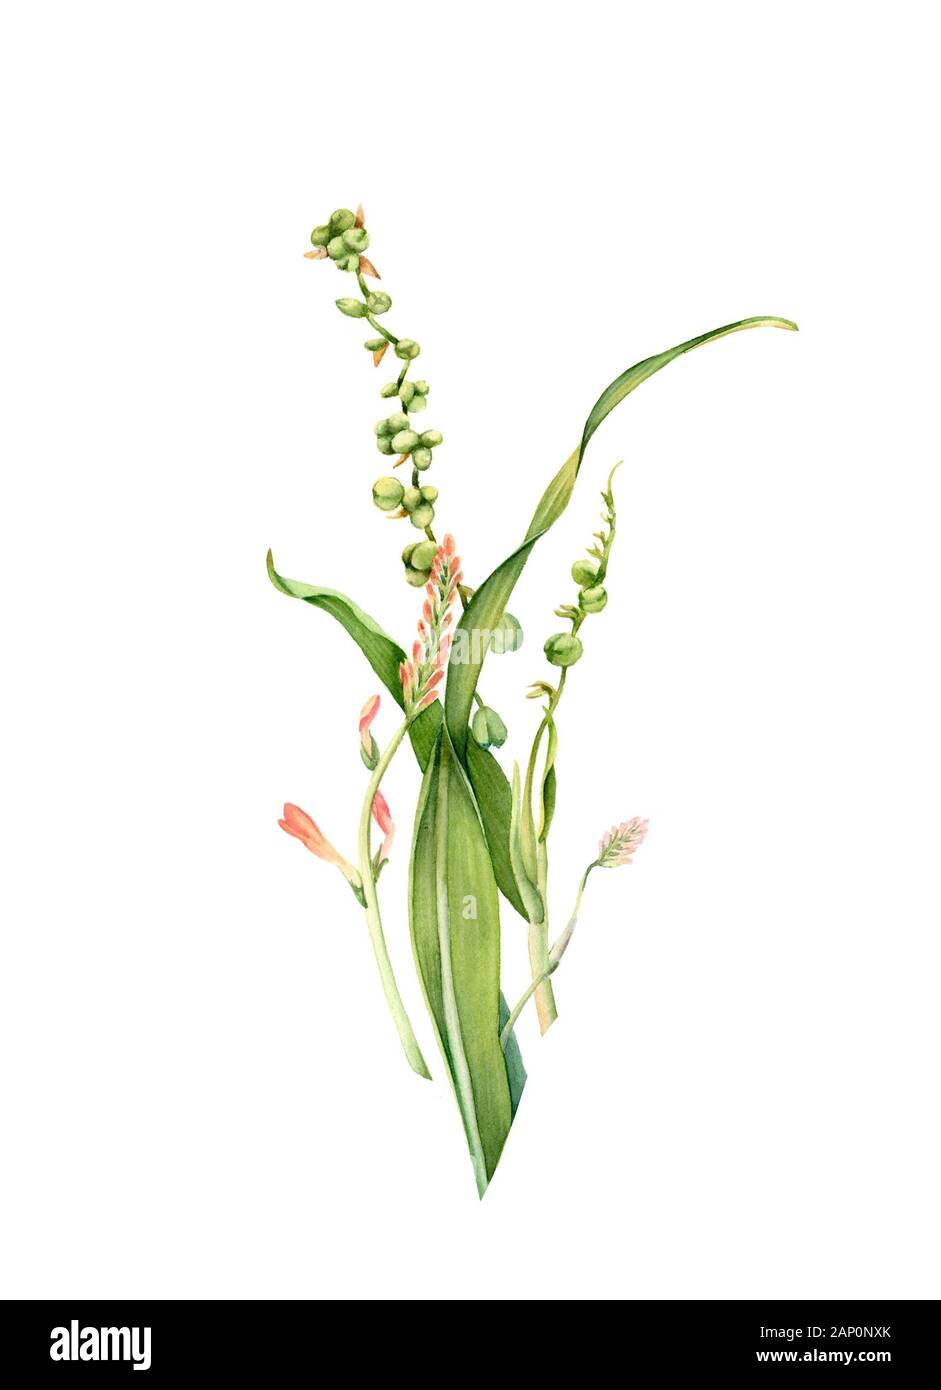 Watercolor leaves. Realistic branch of crocosmia plant isolated on white. Detailed green grass. Botanical floral illustration for wedding design Stock Photo